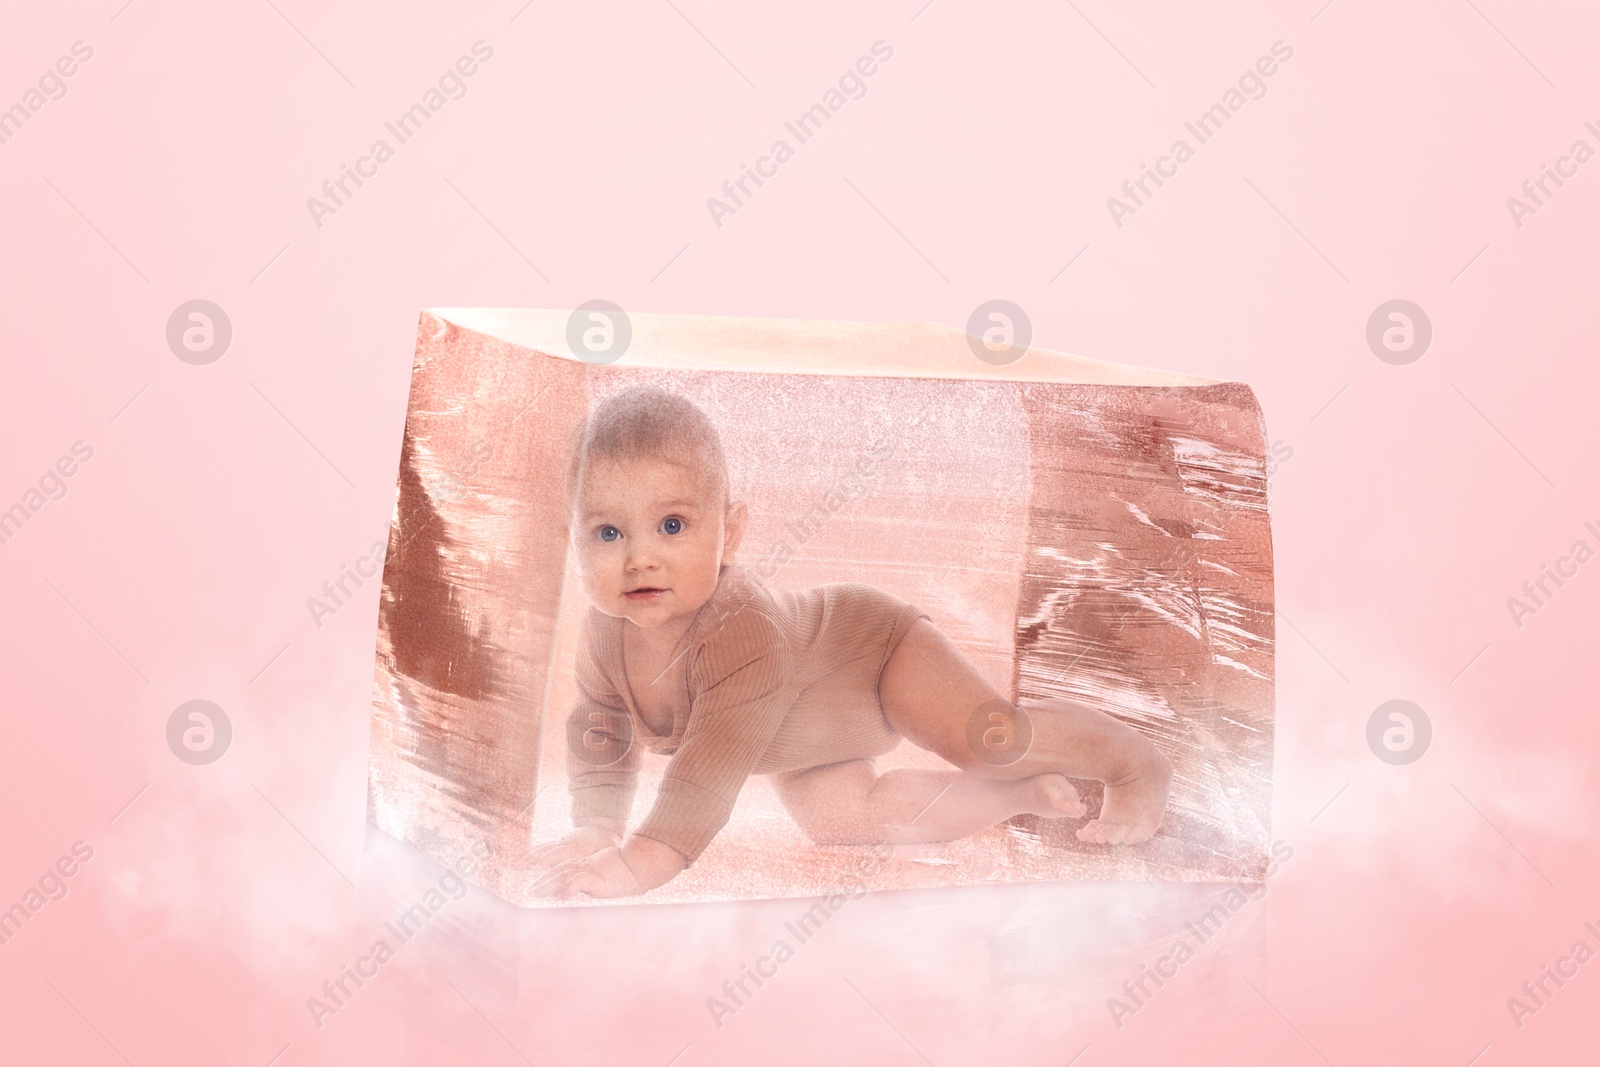 Image of Cryopreservation as method of infertility treatment. Baby in ice cube on pink background